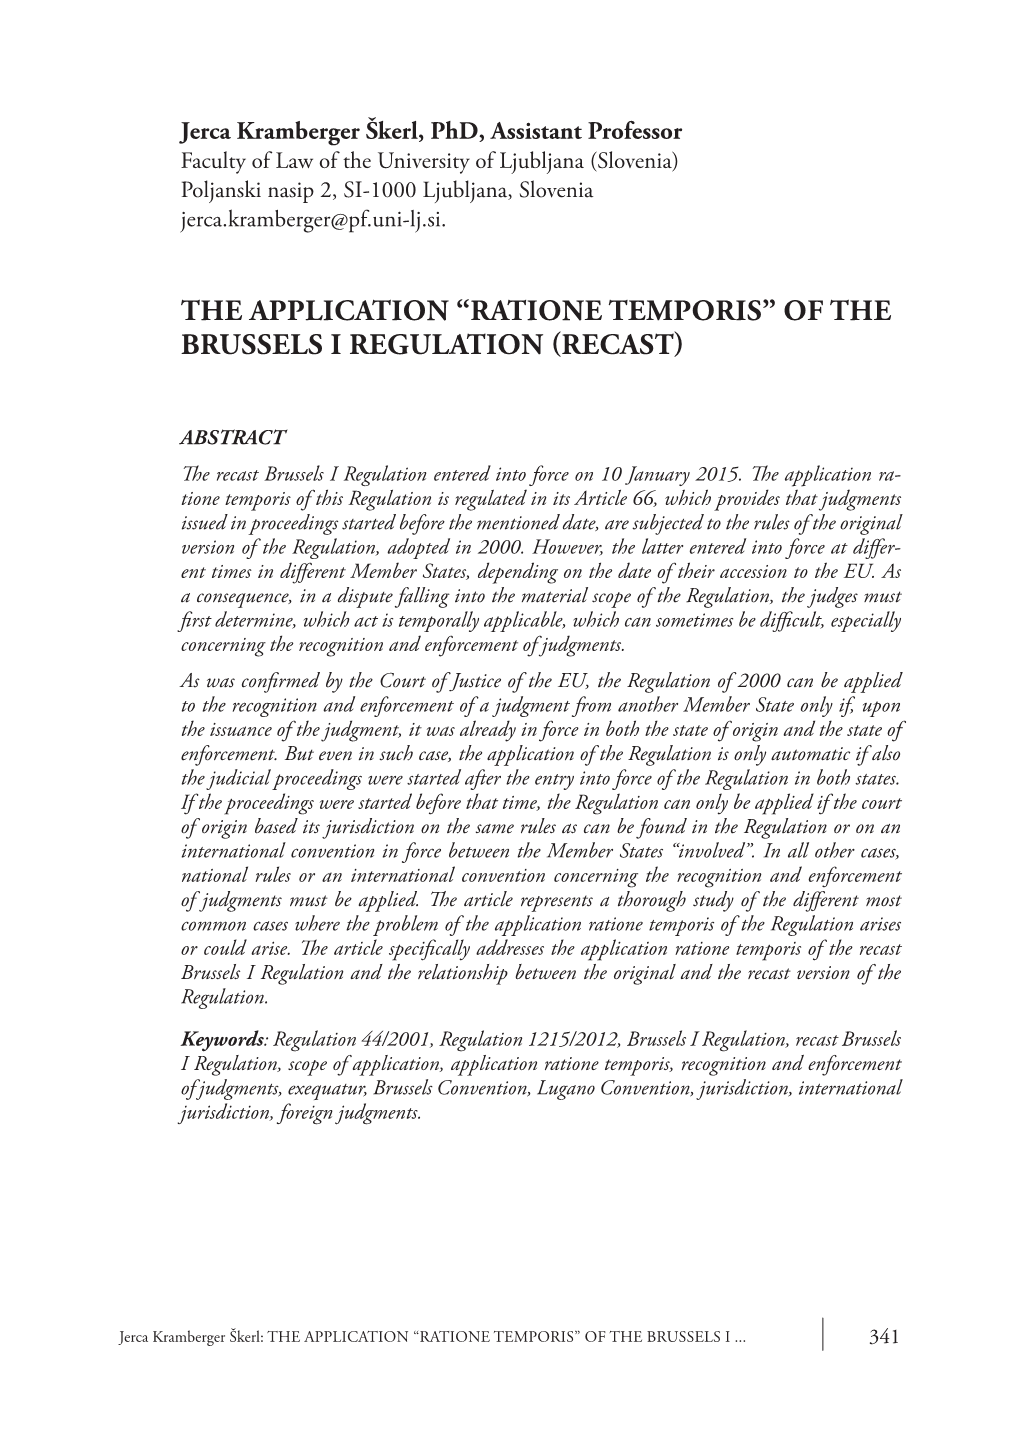 The Application “Ratione Temporis” of the Brussels I Regulation (Recast)